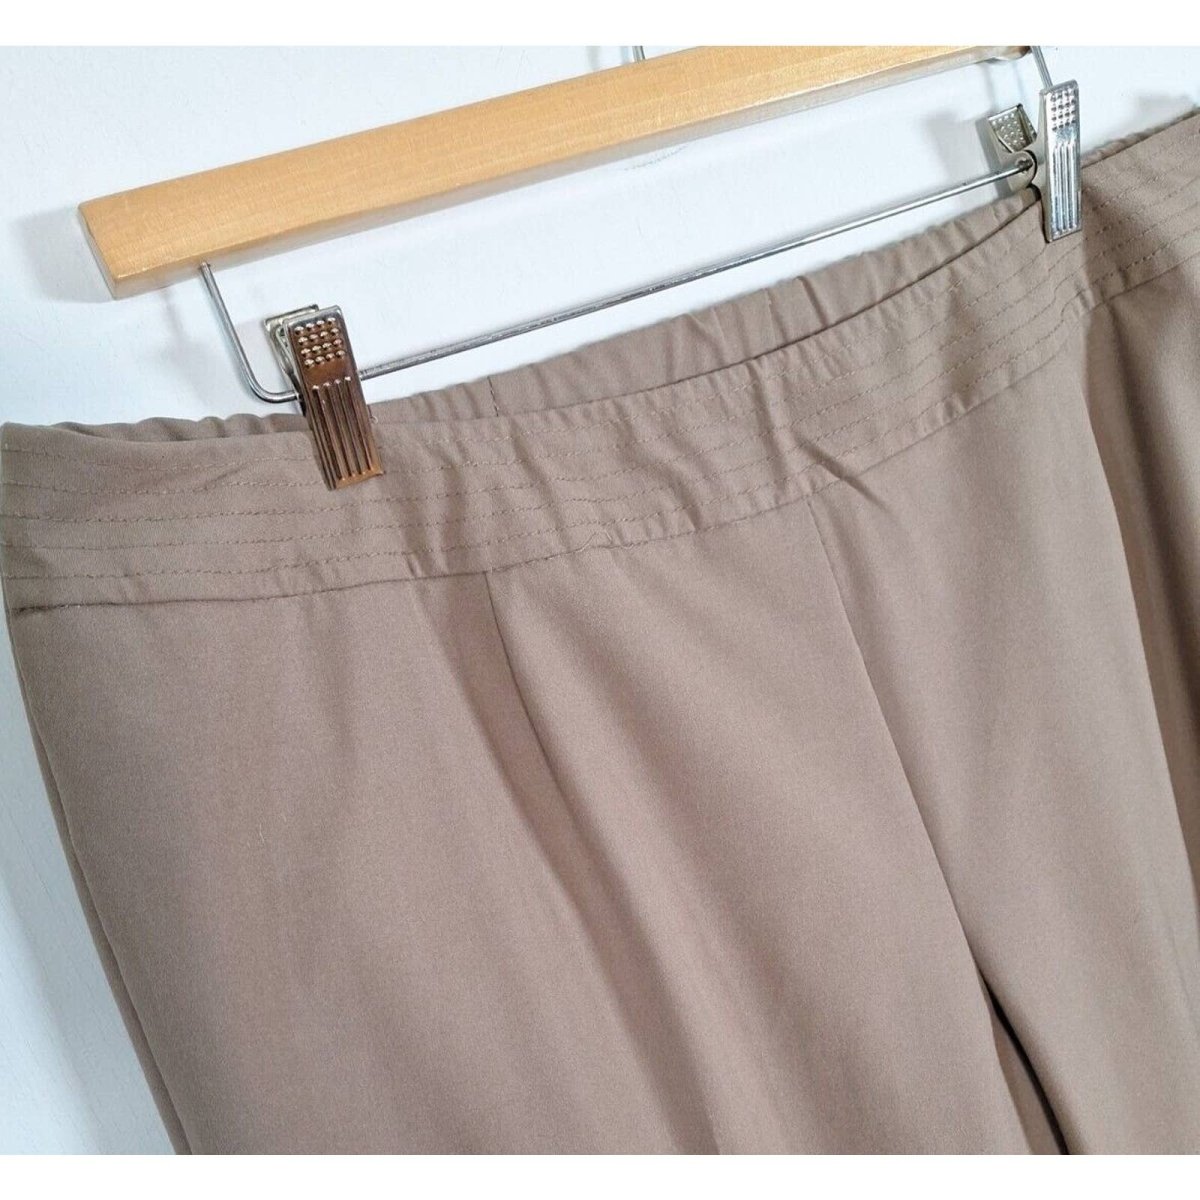 Vintage 90s/Y2K Taupe Stretch Dress Pants Women's Size 18WP - themallvintage The Mall Vintage